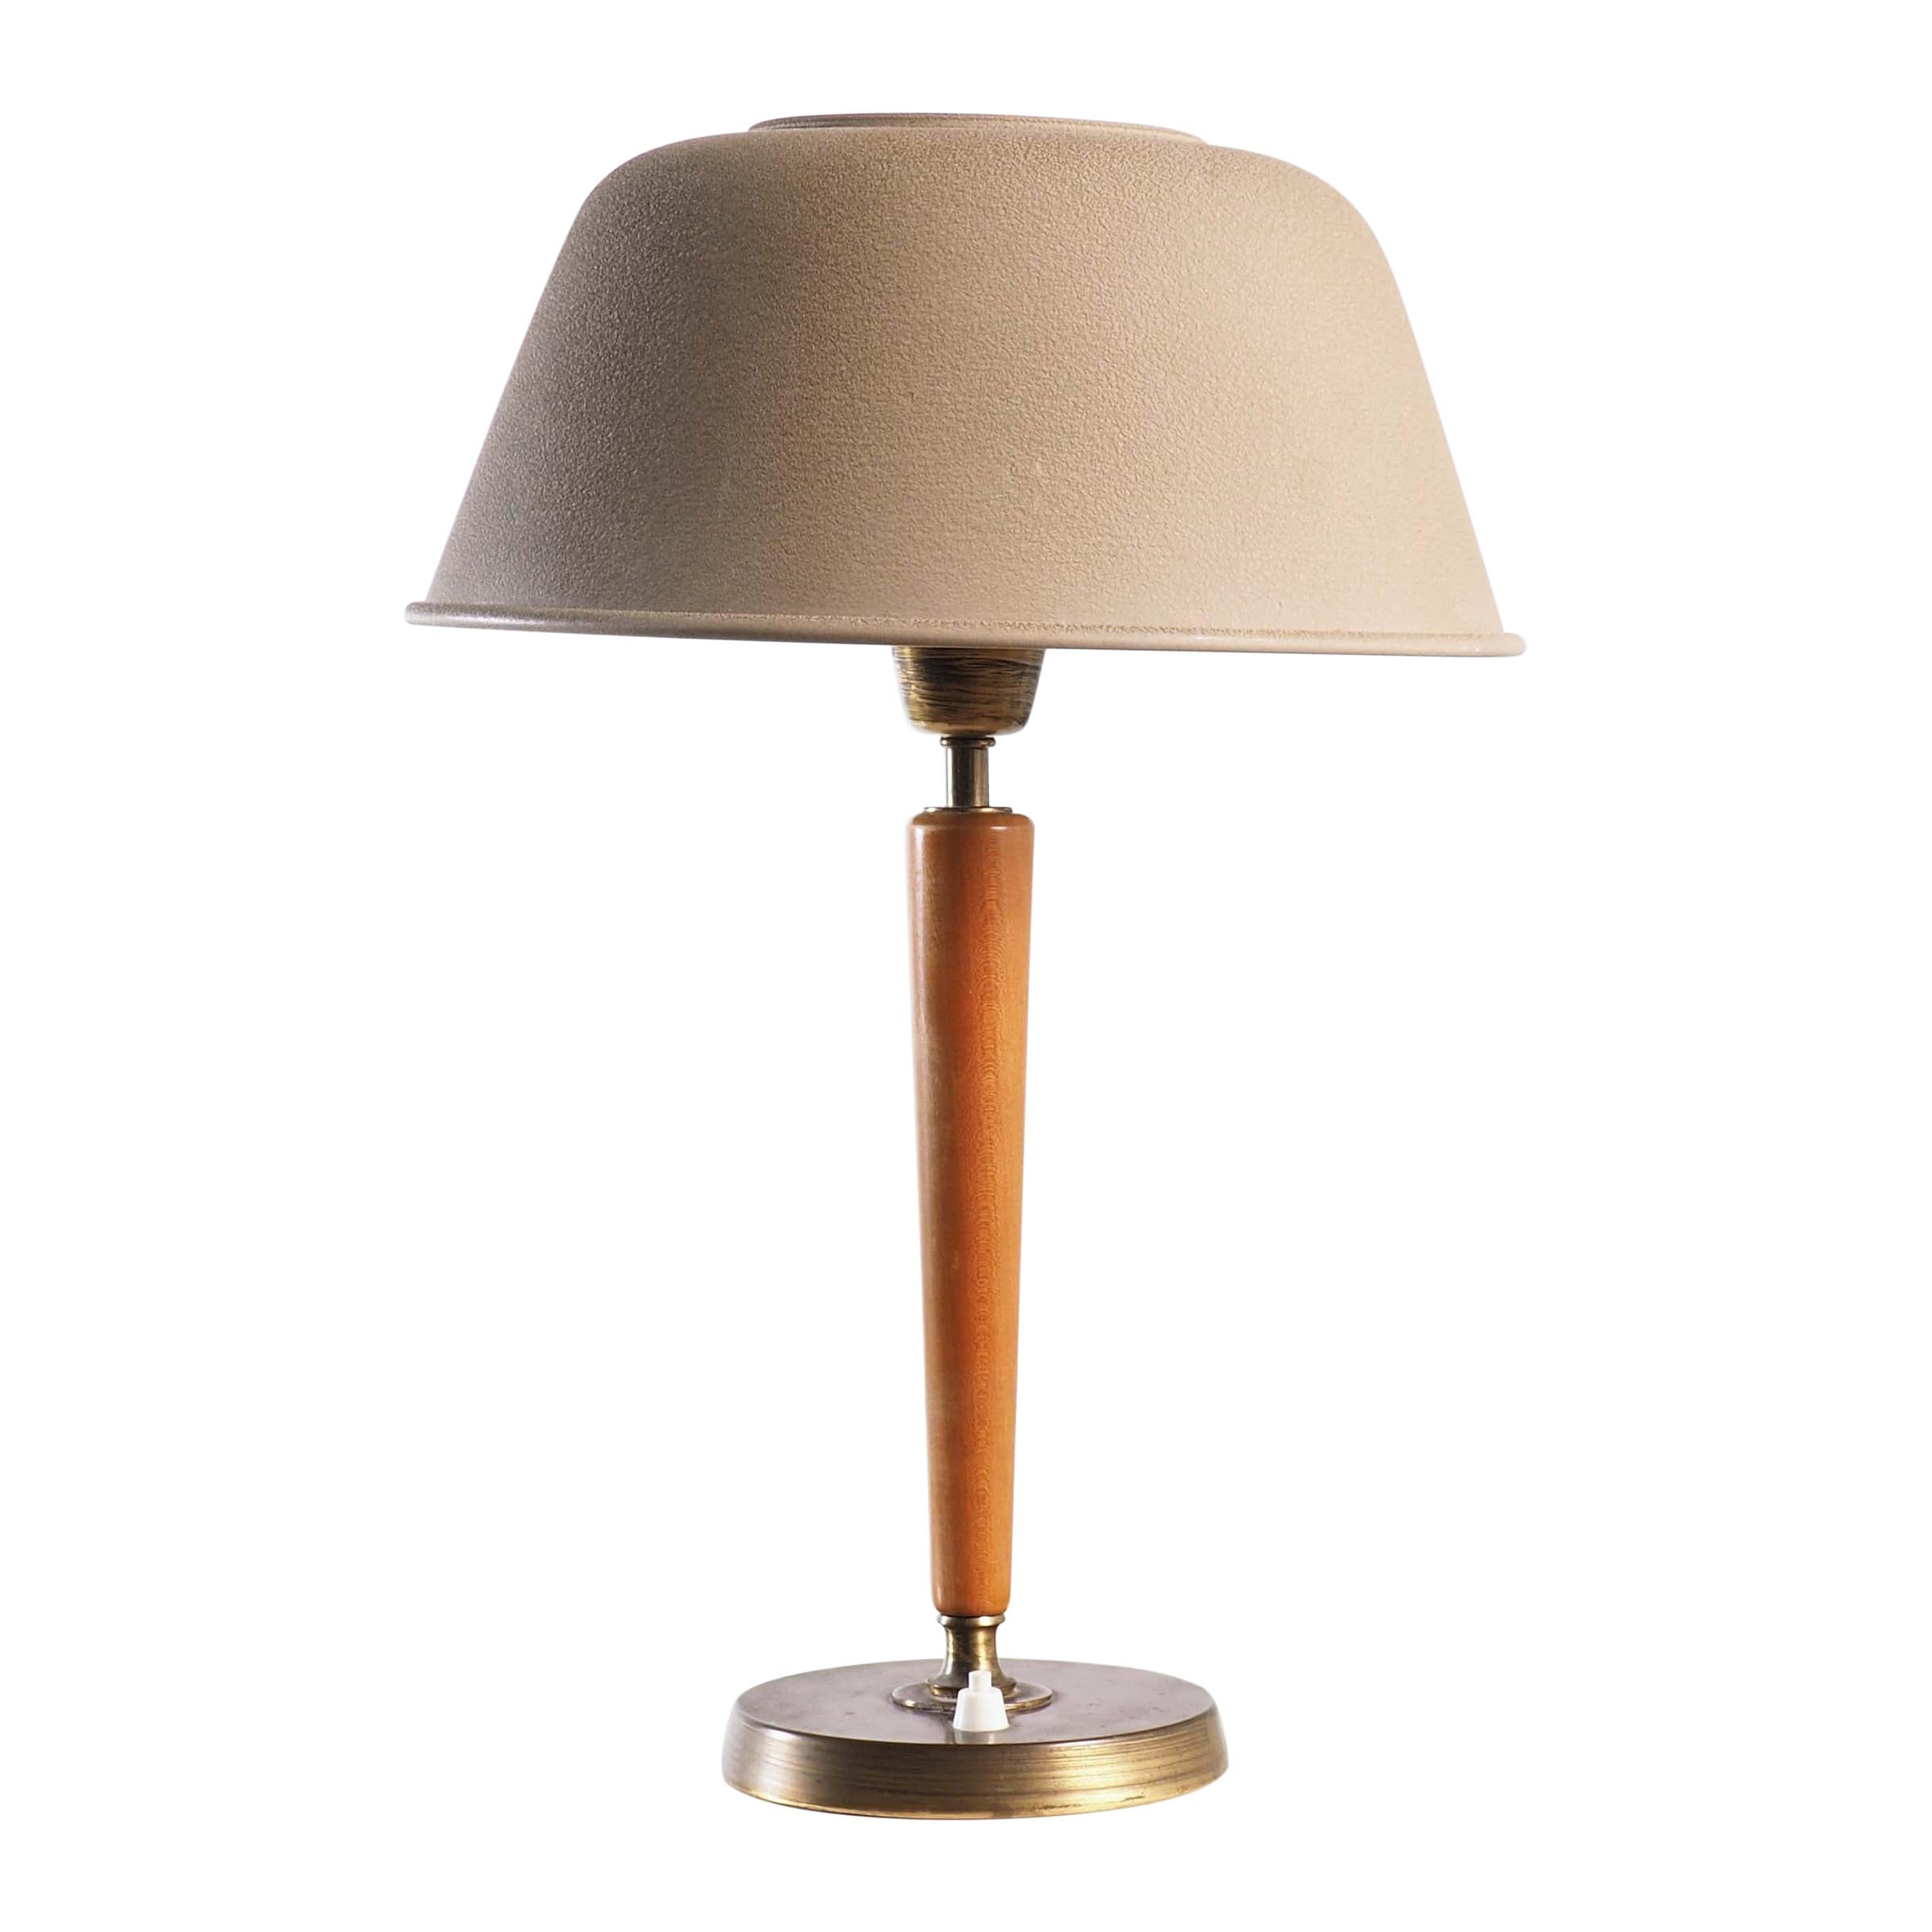 Table Lamp in elm and lacquered metal by Nordiska Kompaniet, Stockholm, Sweden